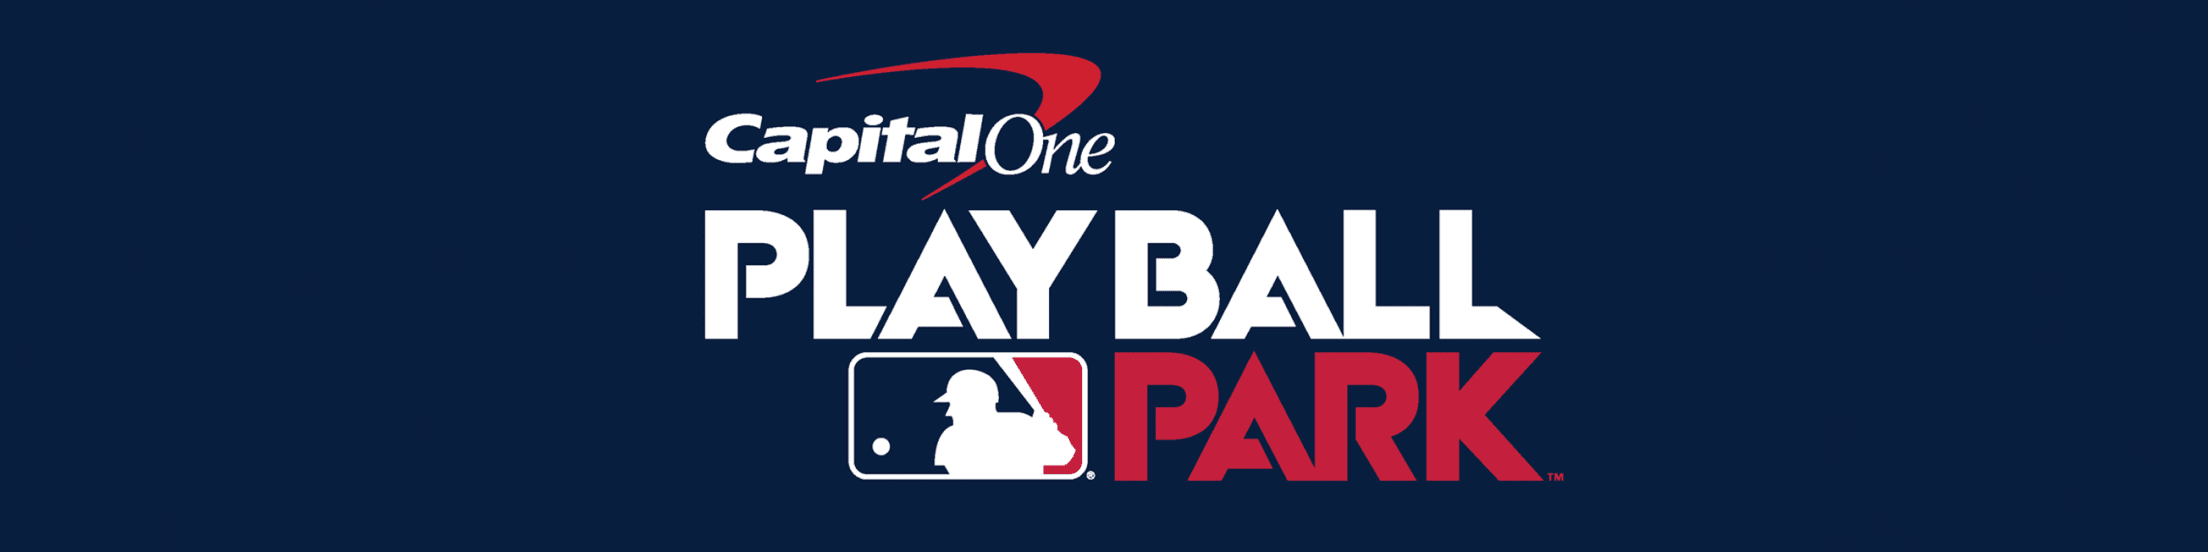 Capital One PLAY BALL PARK Ticket Offer